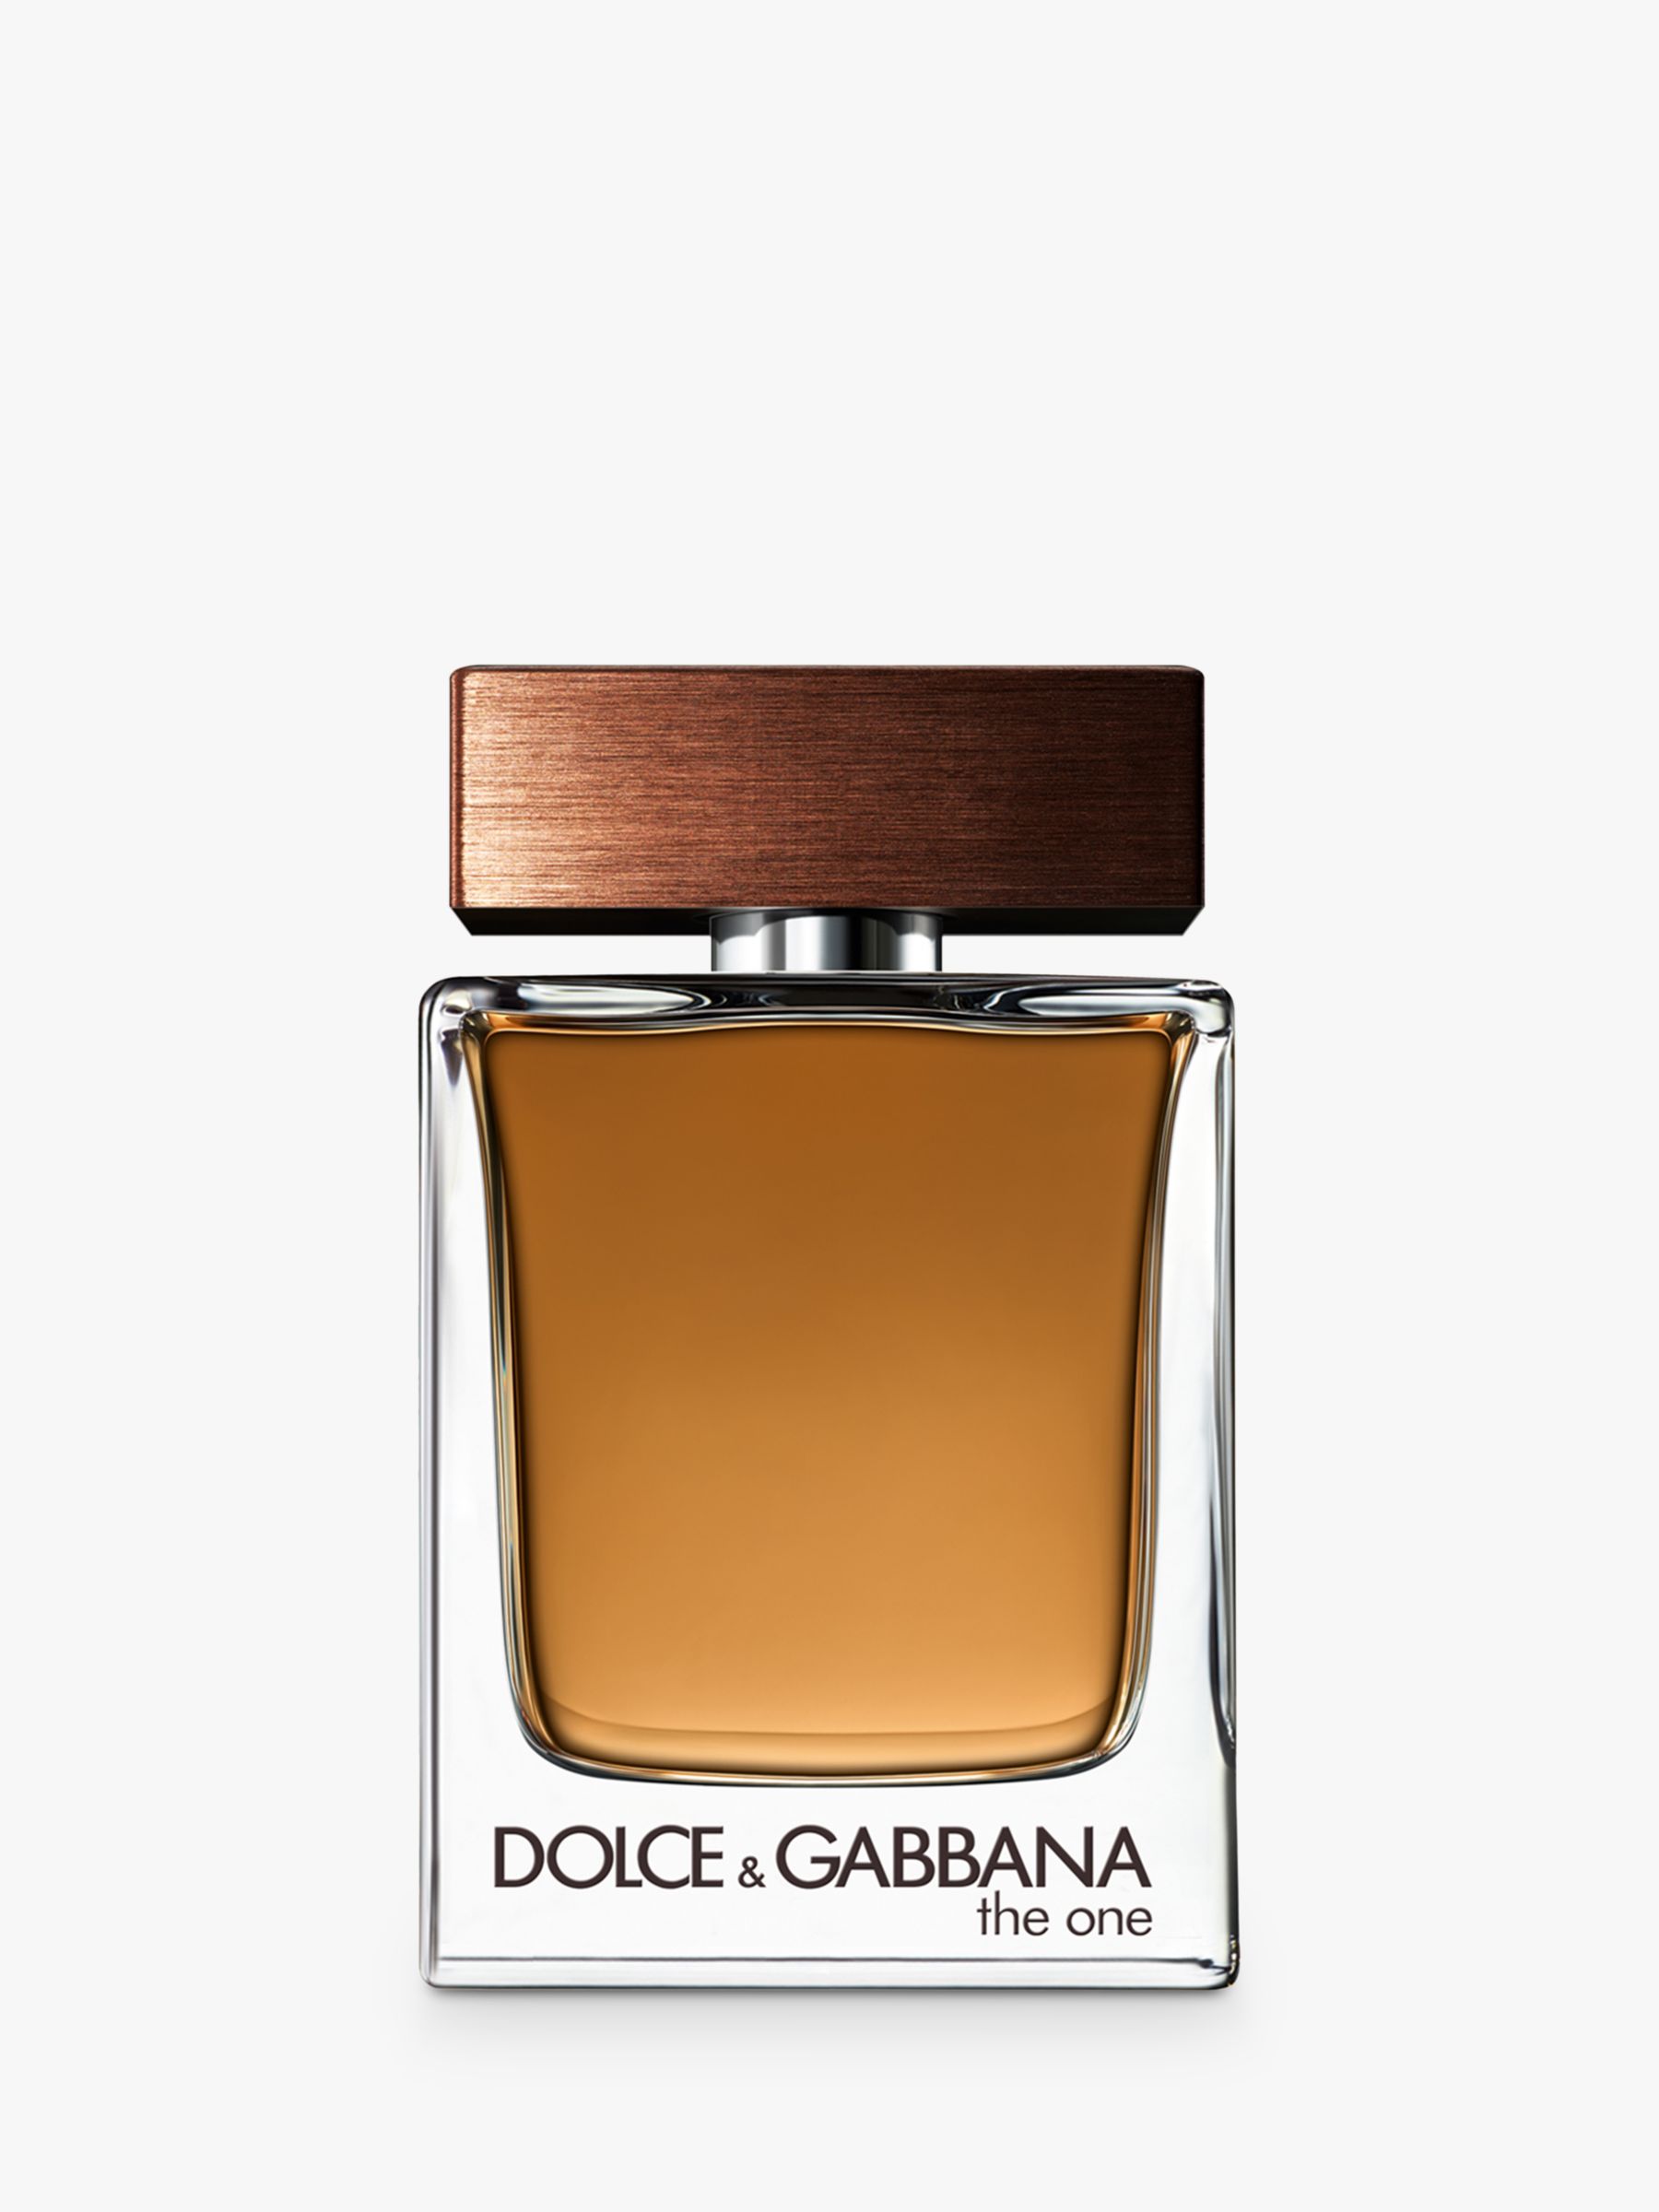 dolce and gabbana the one priceline